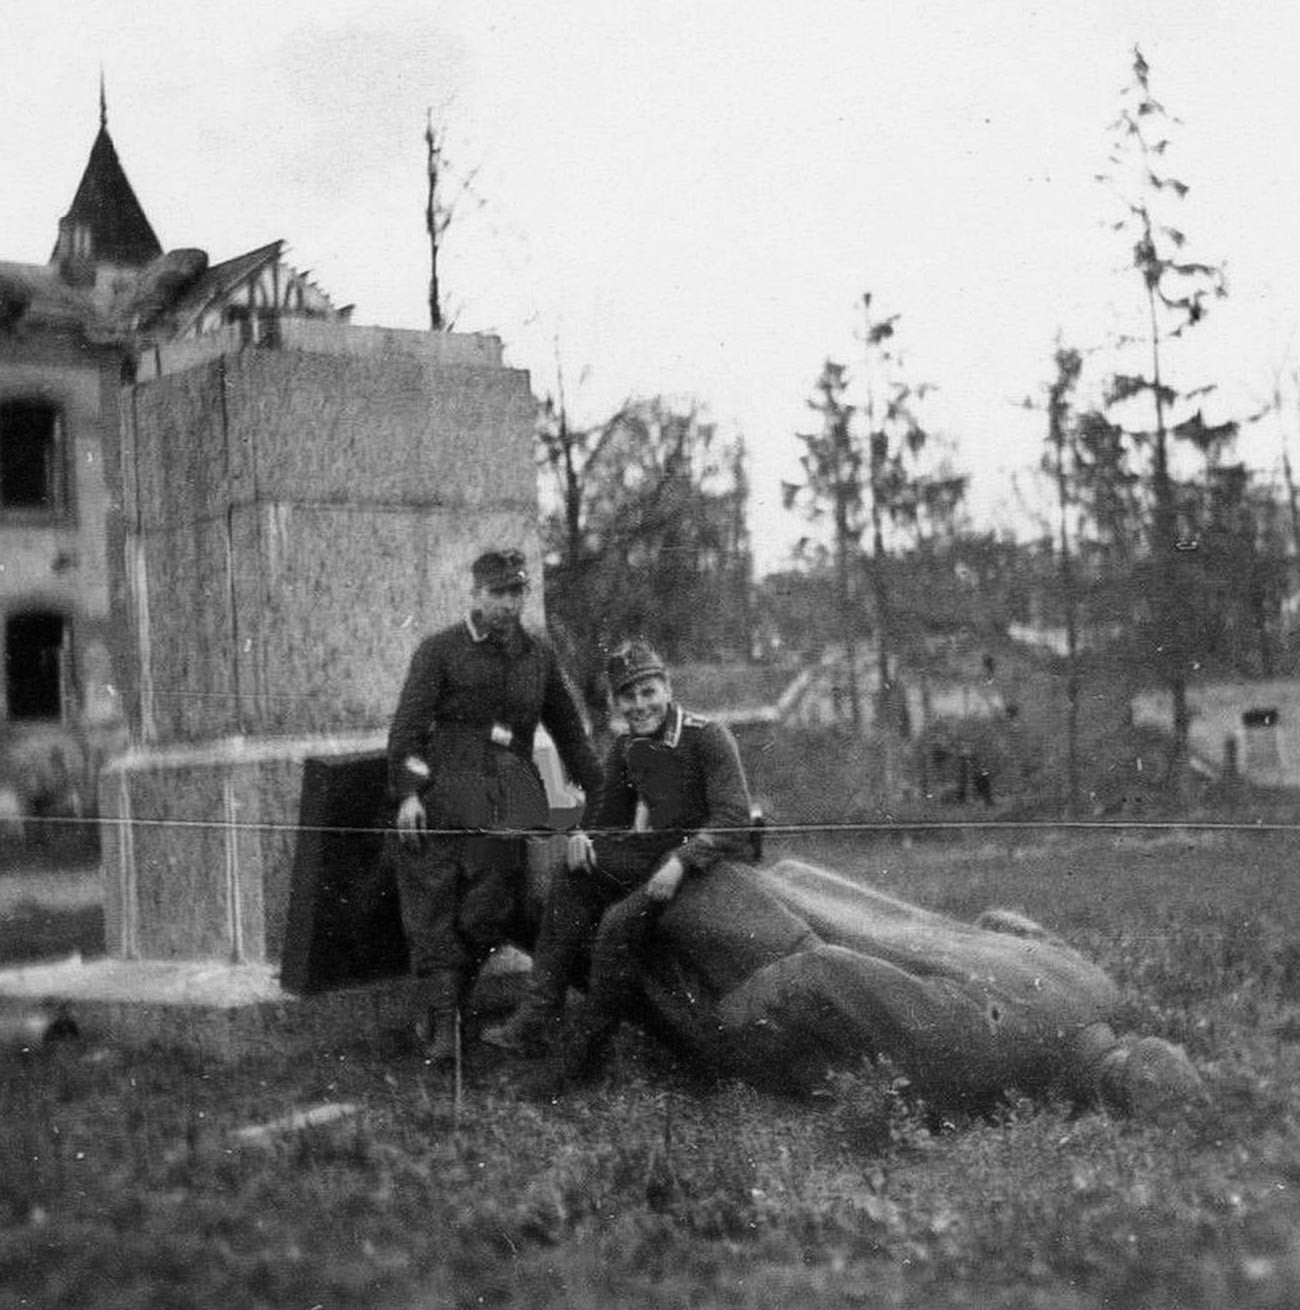 German soldiers near the toppled-down monument in Pushkin, 1941